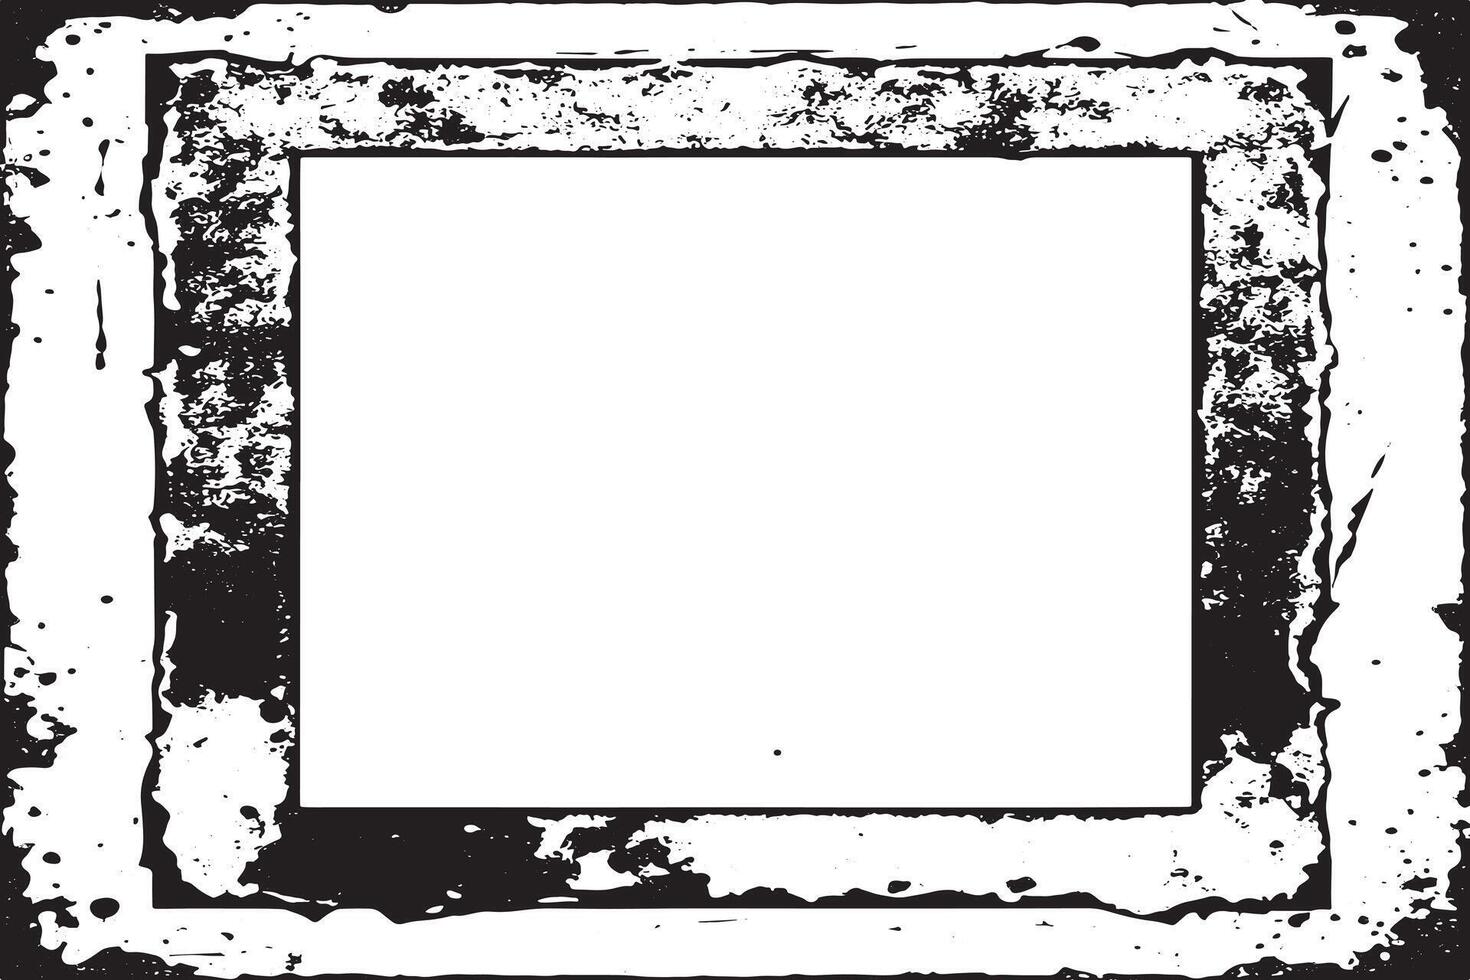 black and white grunge destressed overlay image of photo frame or simple frame for background or texture. vector